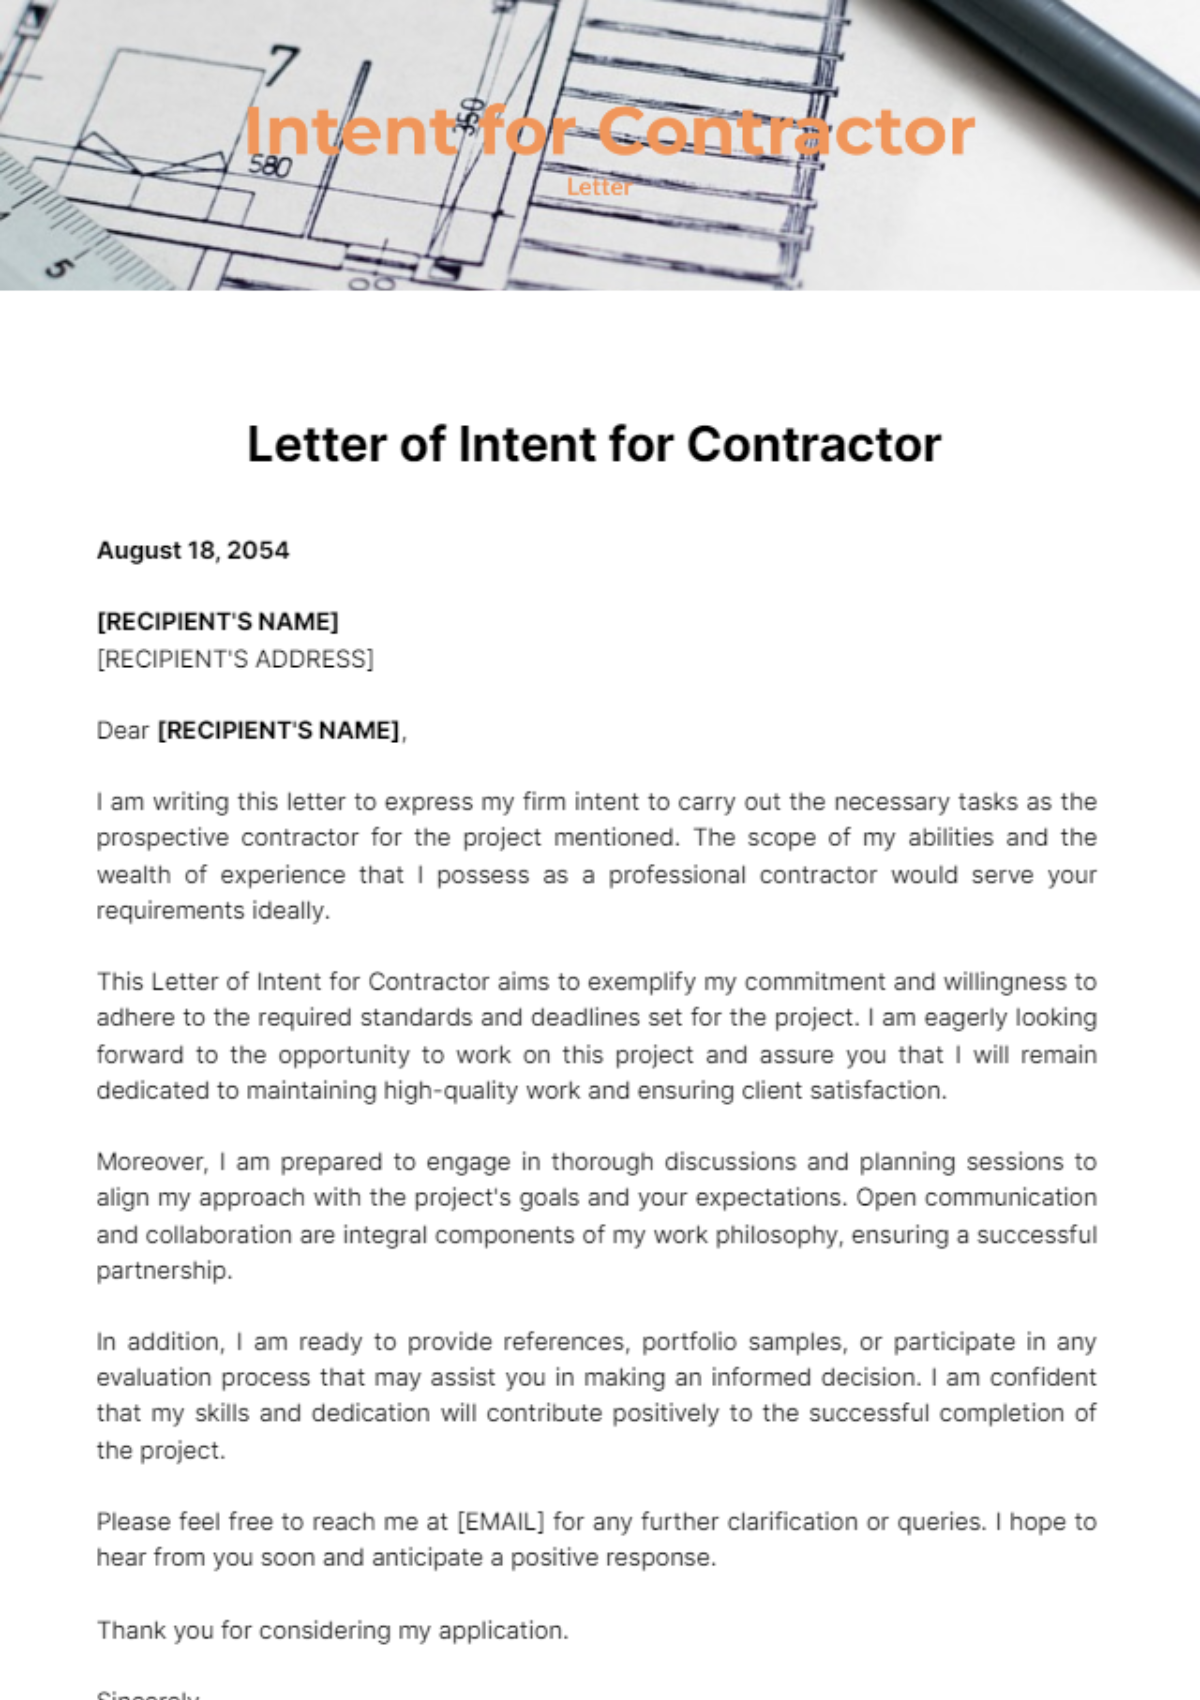 Free Letter of Intent for Contractor Template